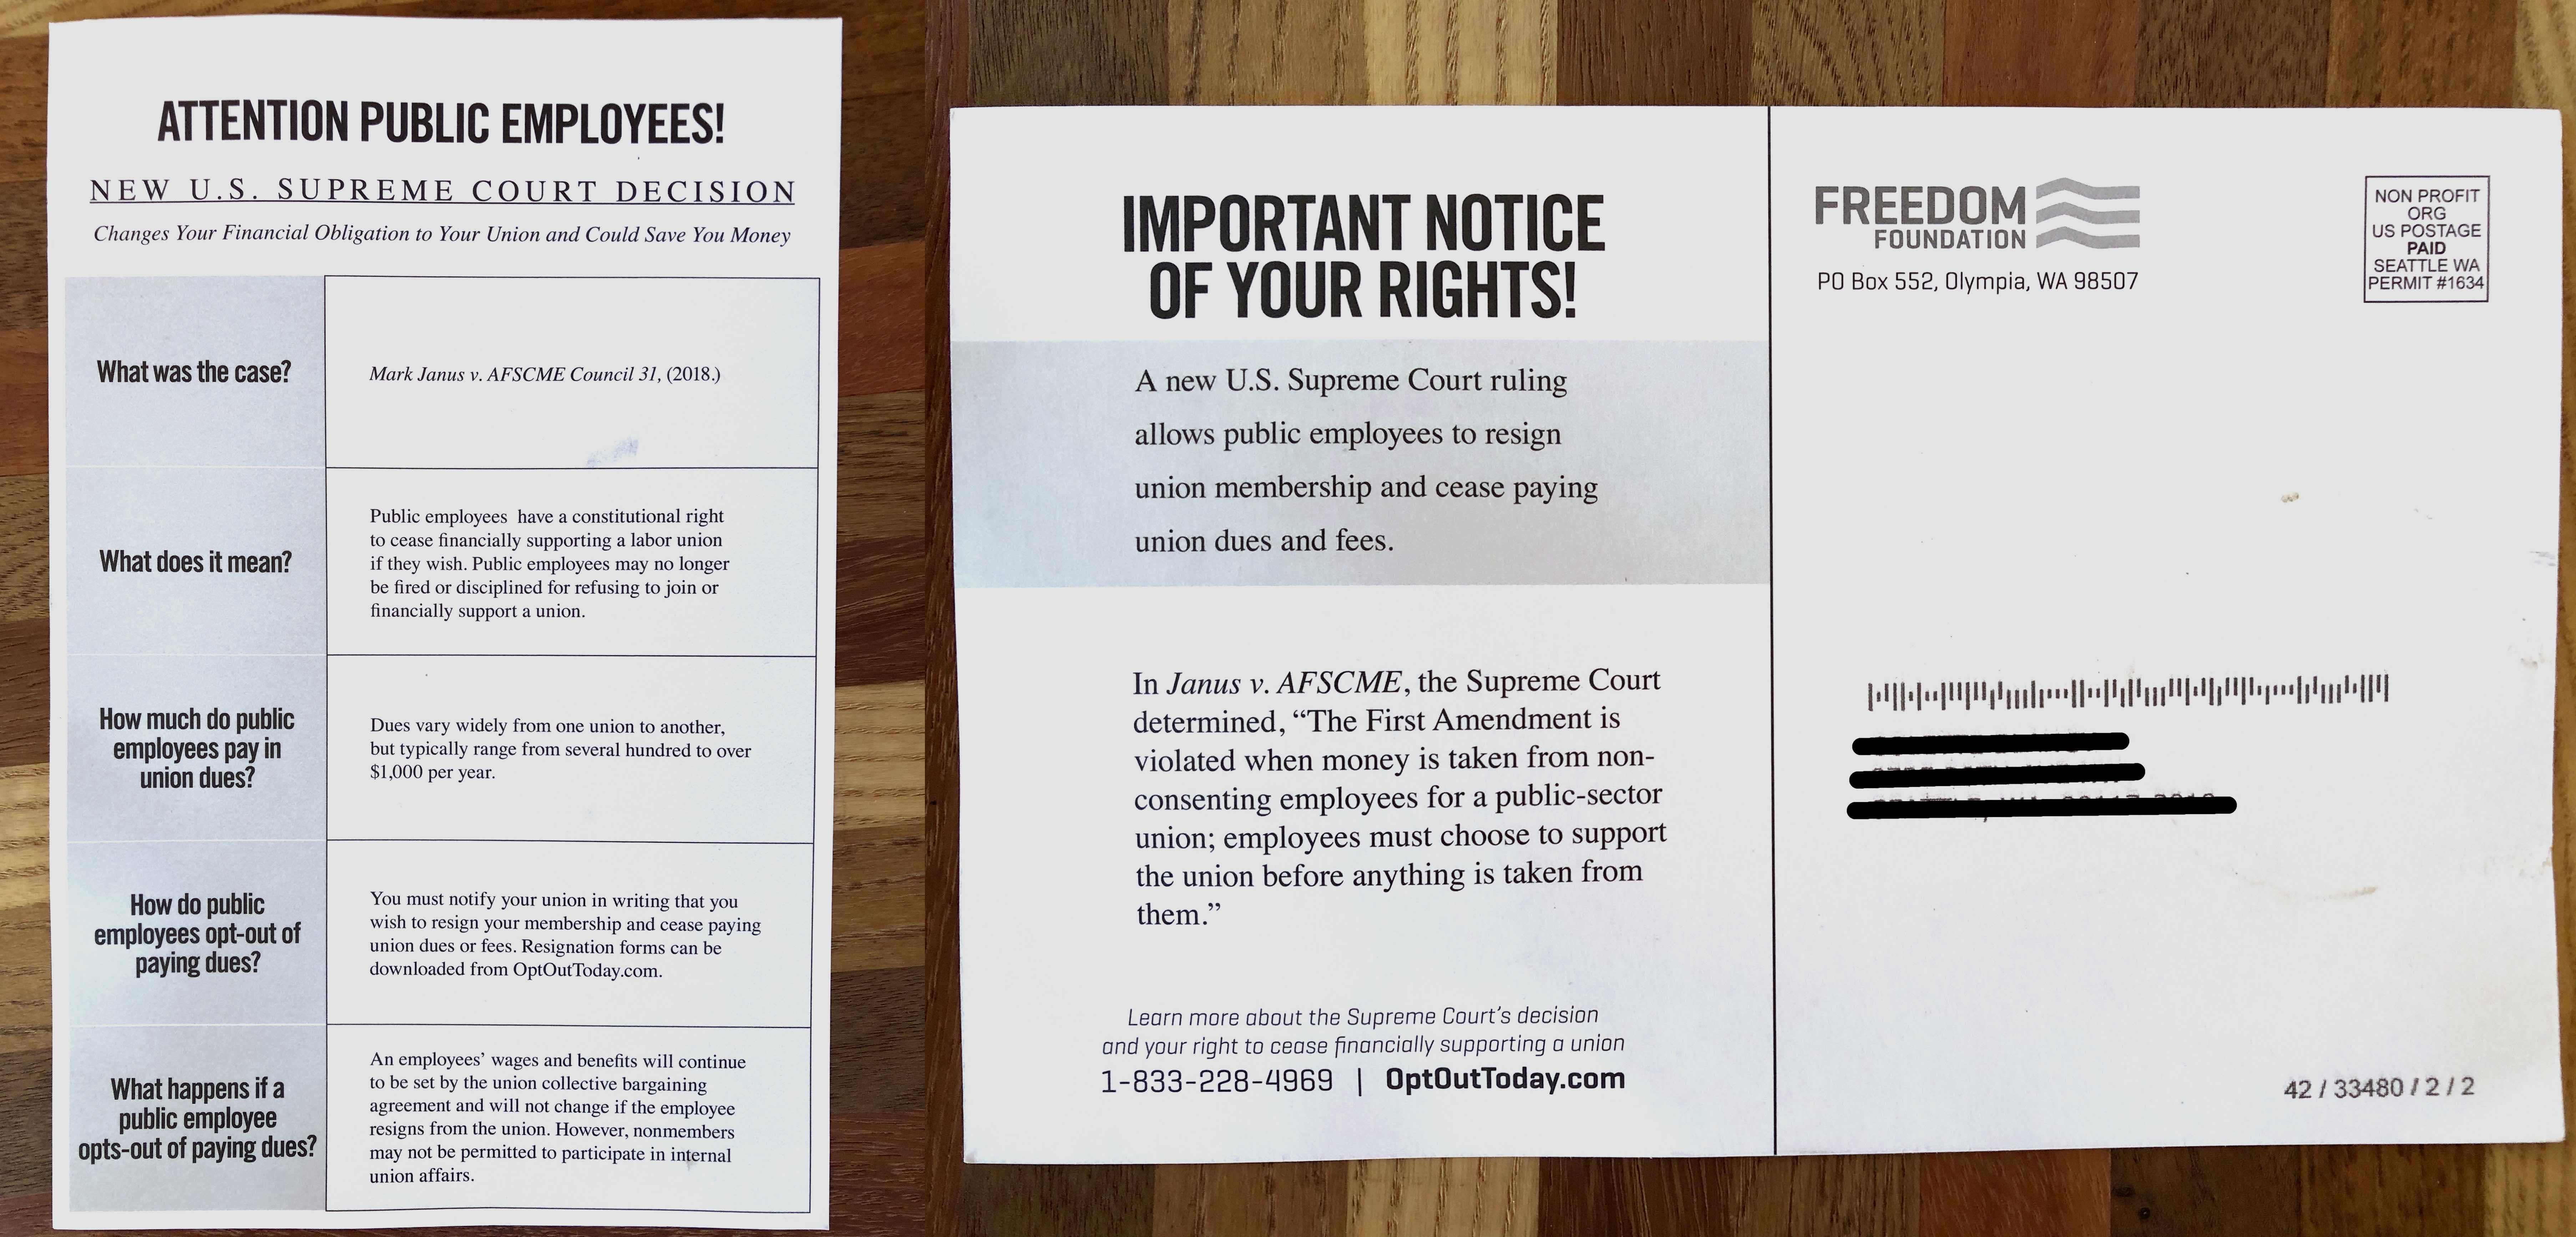 Fliers sent to state employees by the conservative Freedom Foundation.